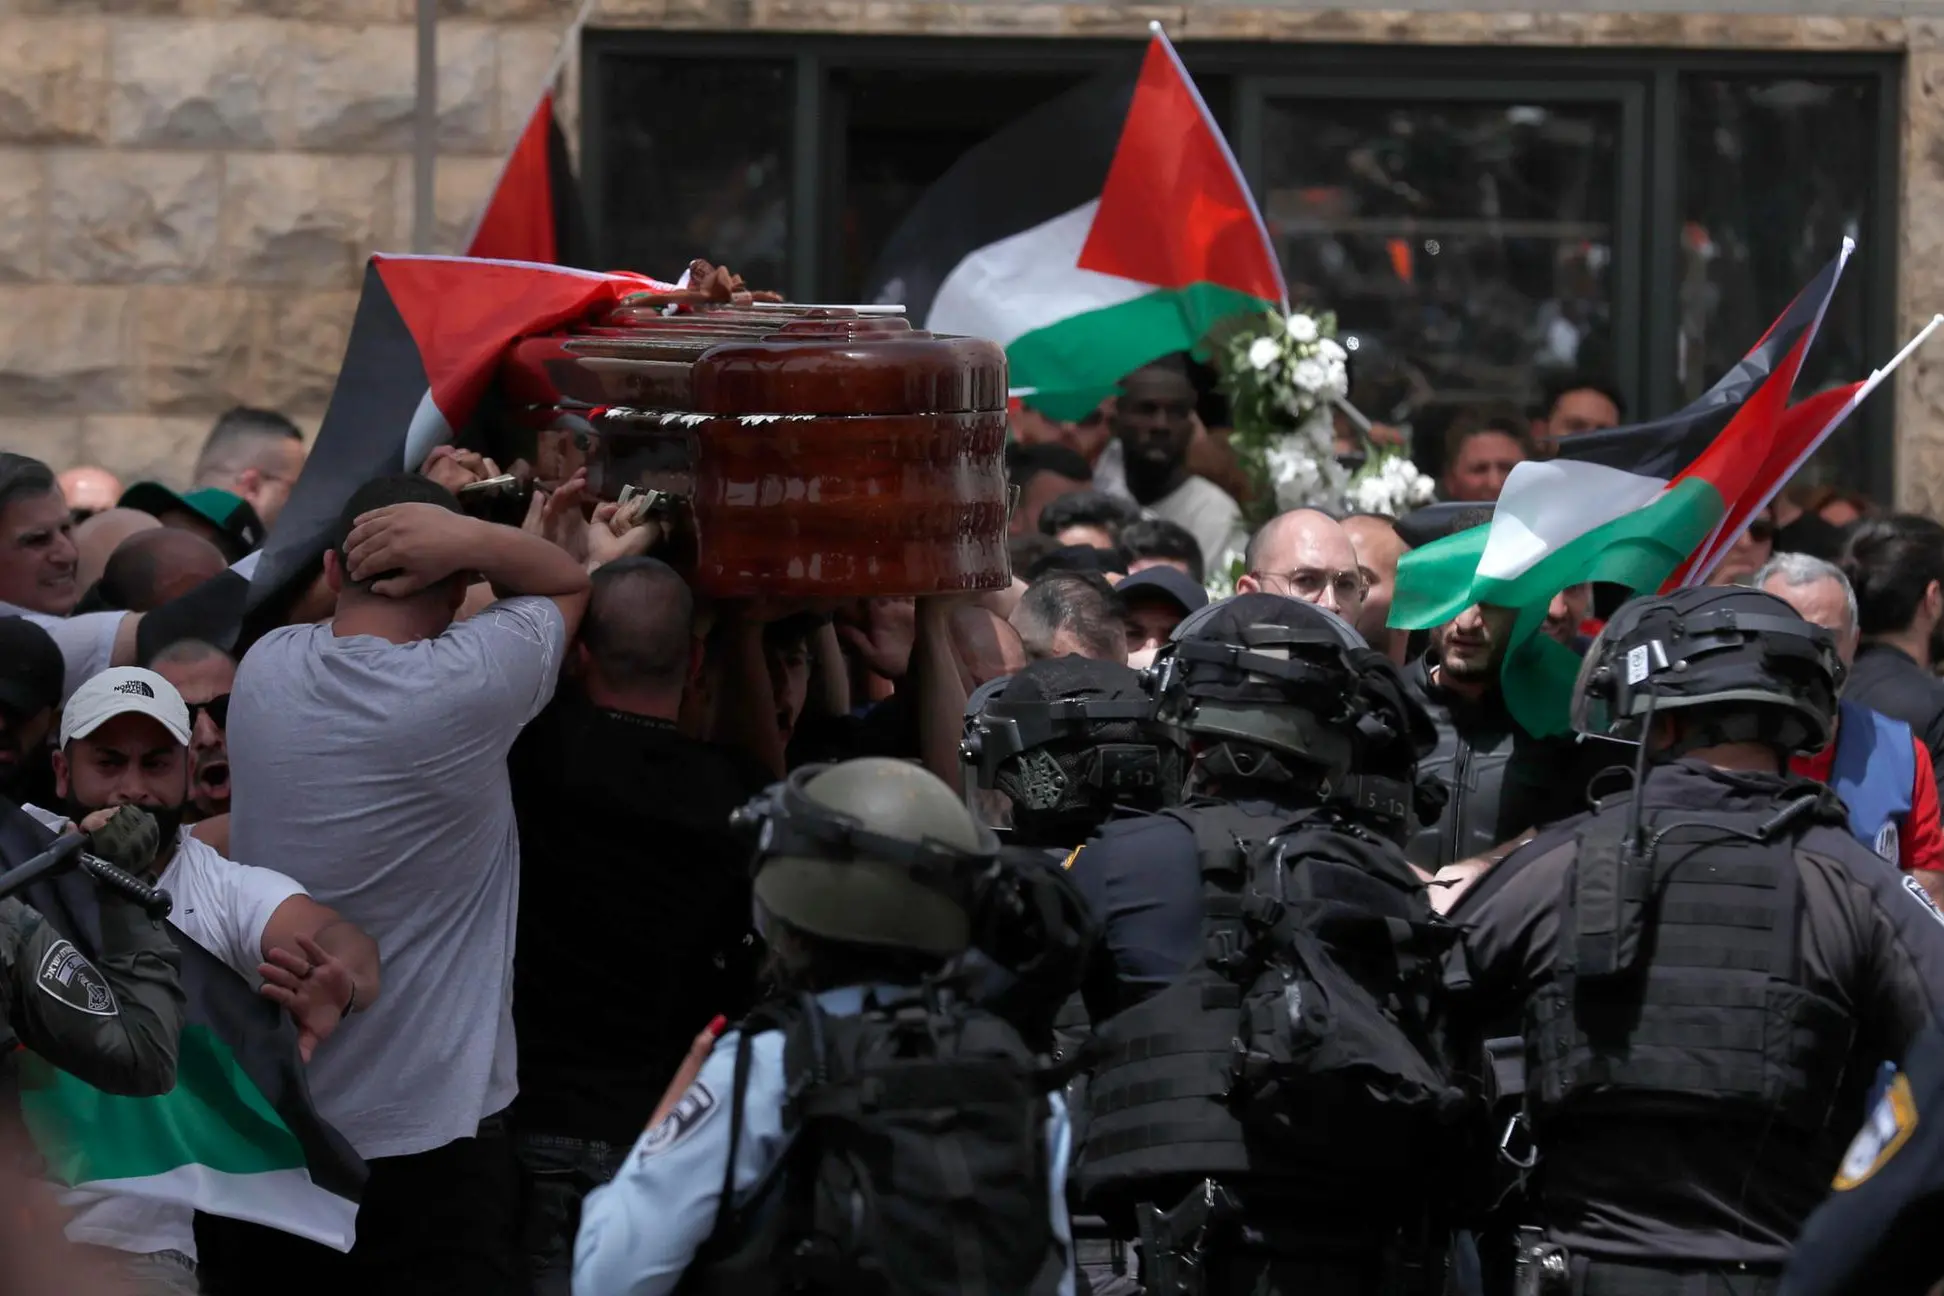 epaselect epa09944328 Mourners carry the coffin of slain American-Palestinian journalist Shireen Abu Akleh outside St. Joseph Hospital, ahead of a funeral procession in the Old City of Jerusalem, 13 May 2022. Al Jazeera journalist Shireen Abu Akleh was killed on 11 May 2022 during a raid by Israeli forces in the West Bank town of Jenin. EPA/ATEF SAFADI